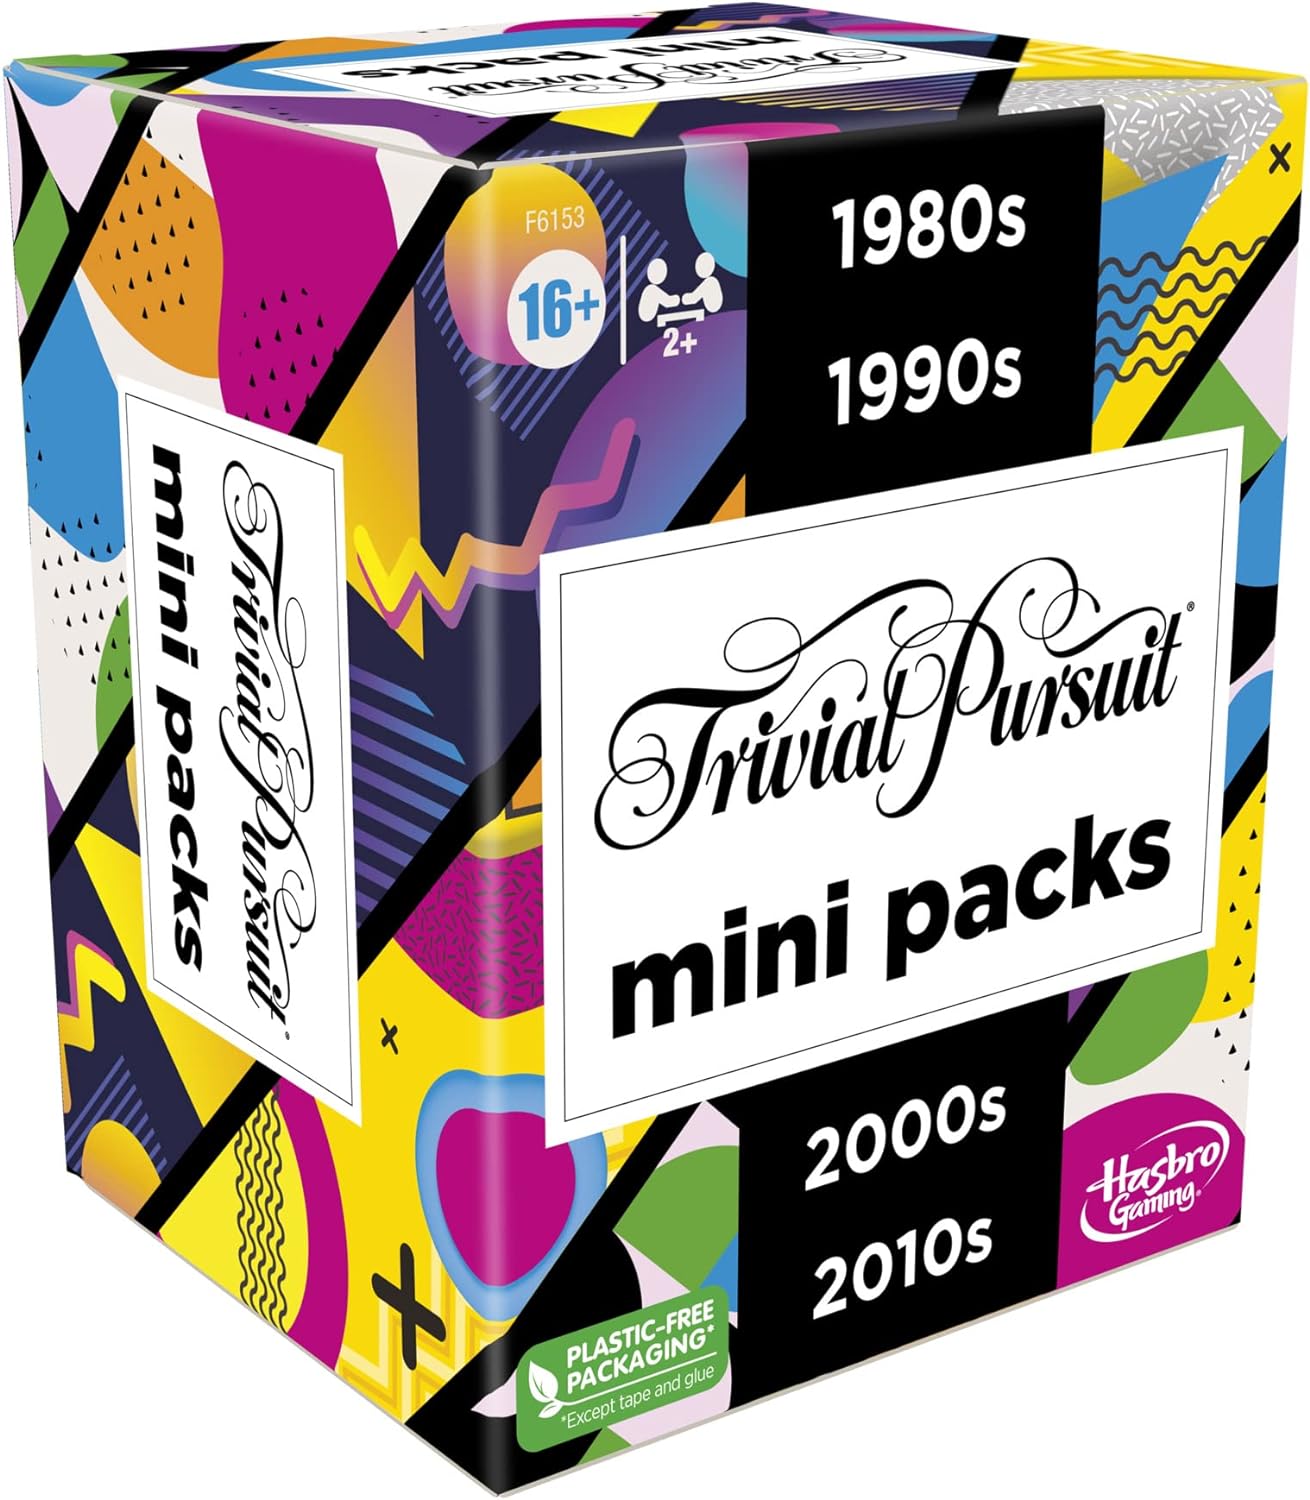 Trivial Pursuit Mini Packs Multipack Fun Fun Fun Questions for Adults and Teens Ages 16+ Includes 4 Games with 4 Decades